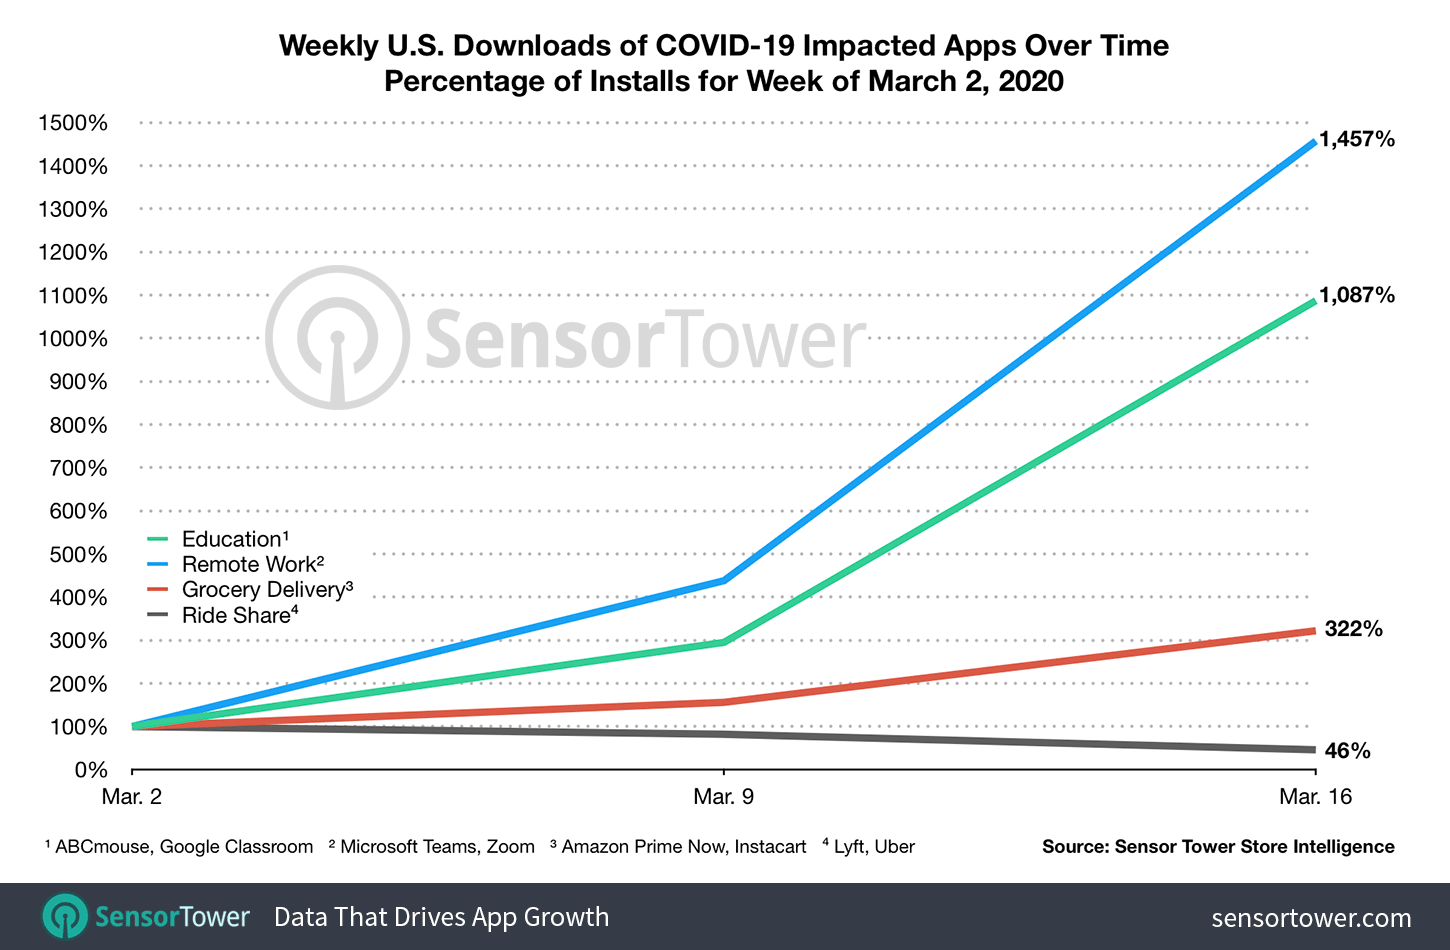 Weekly U.S. Downloads of COVID-19 Impacted Apps Over Time